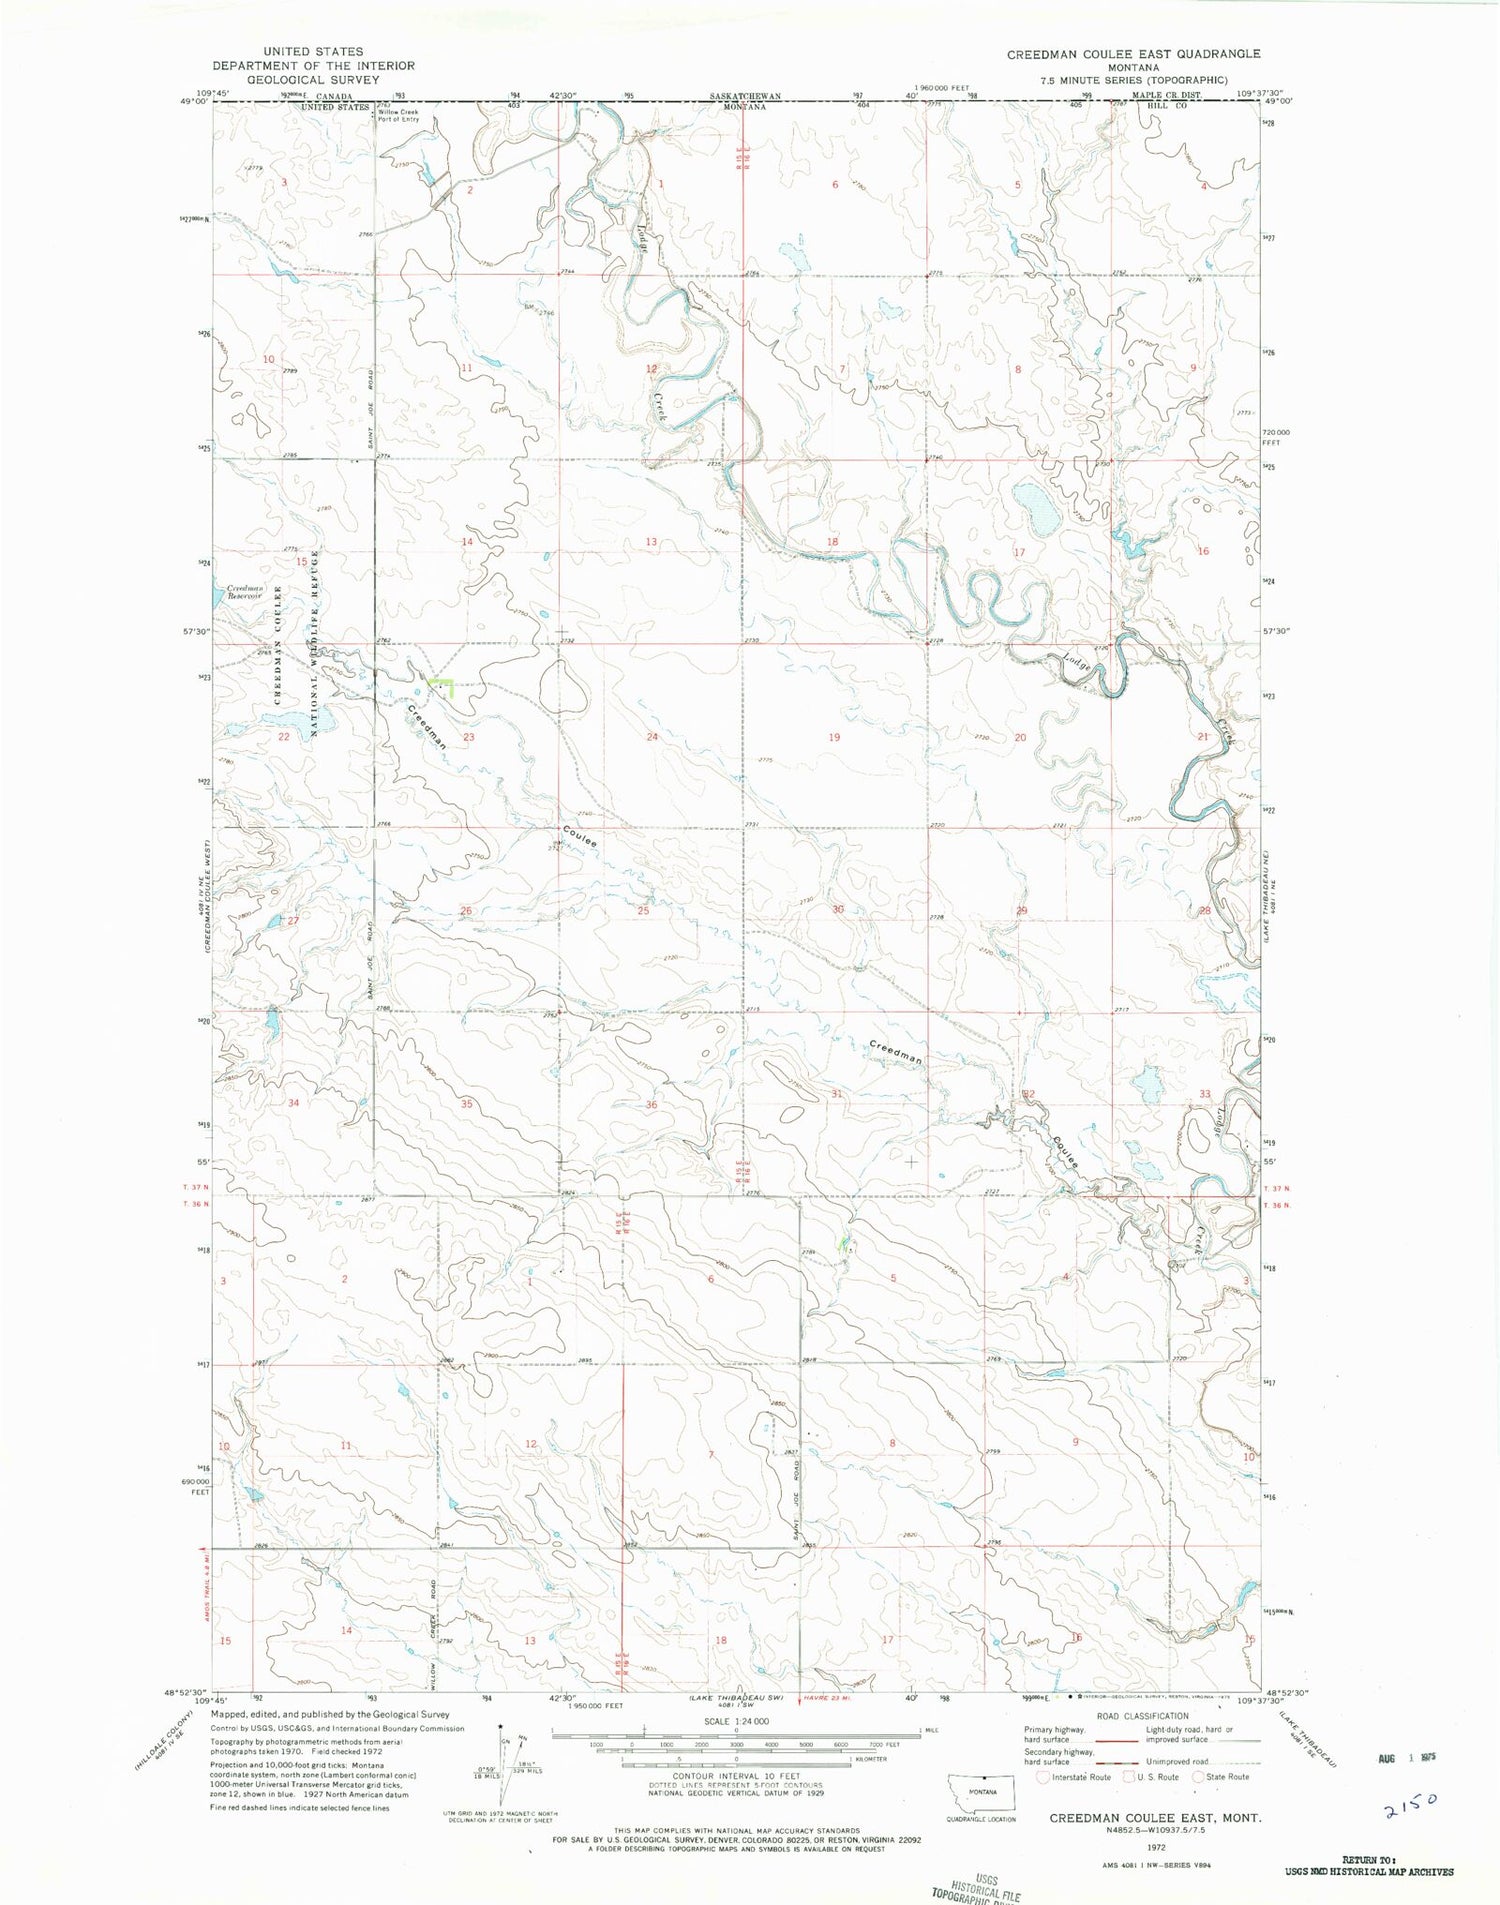 Classic USGS Creedman Coulee East Montana 7.5'x7.5' Topo Map Image